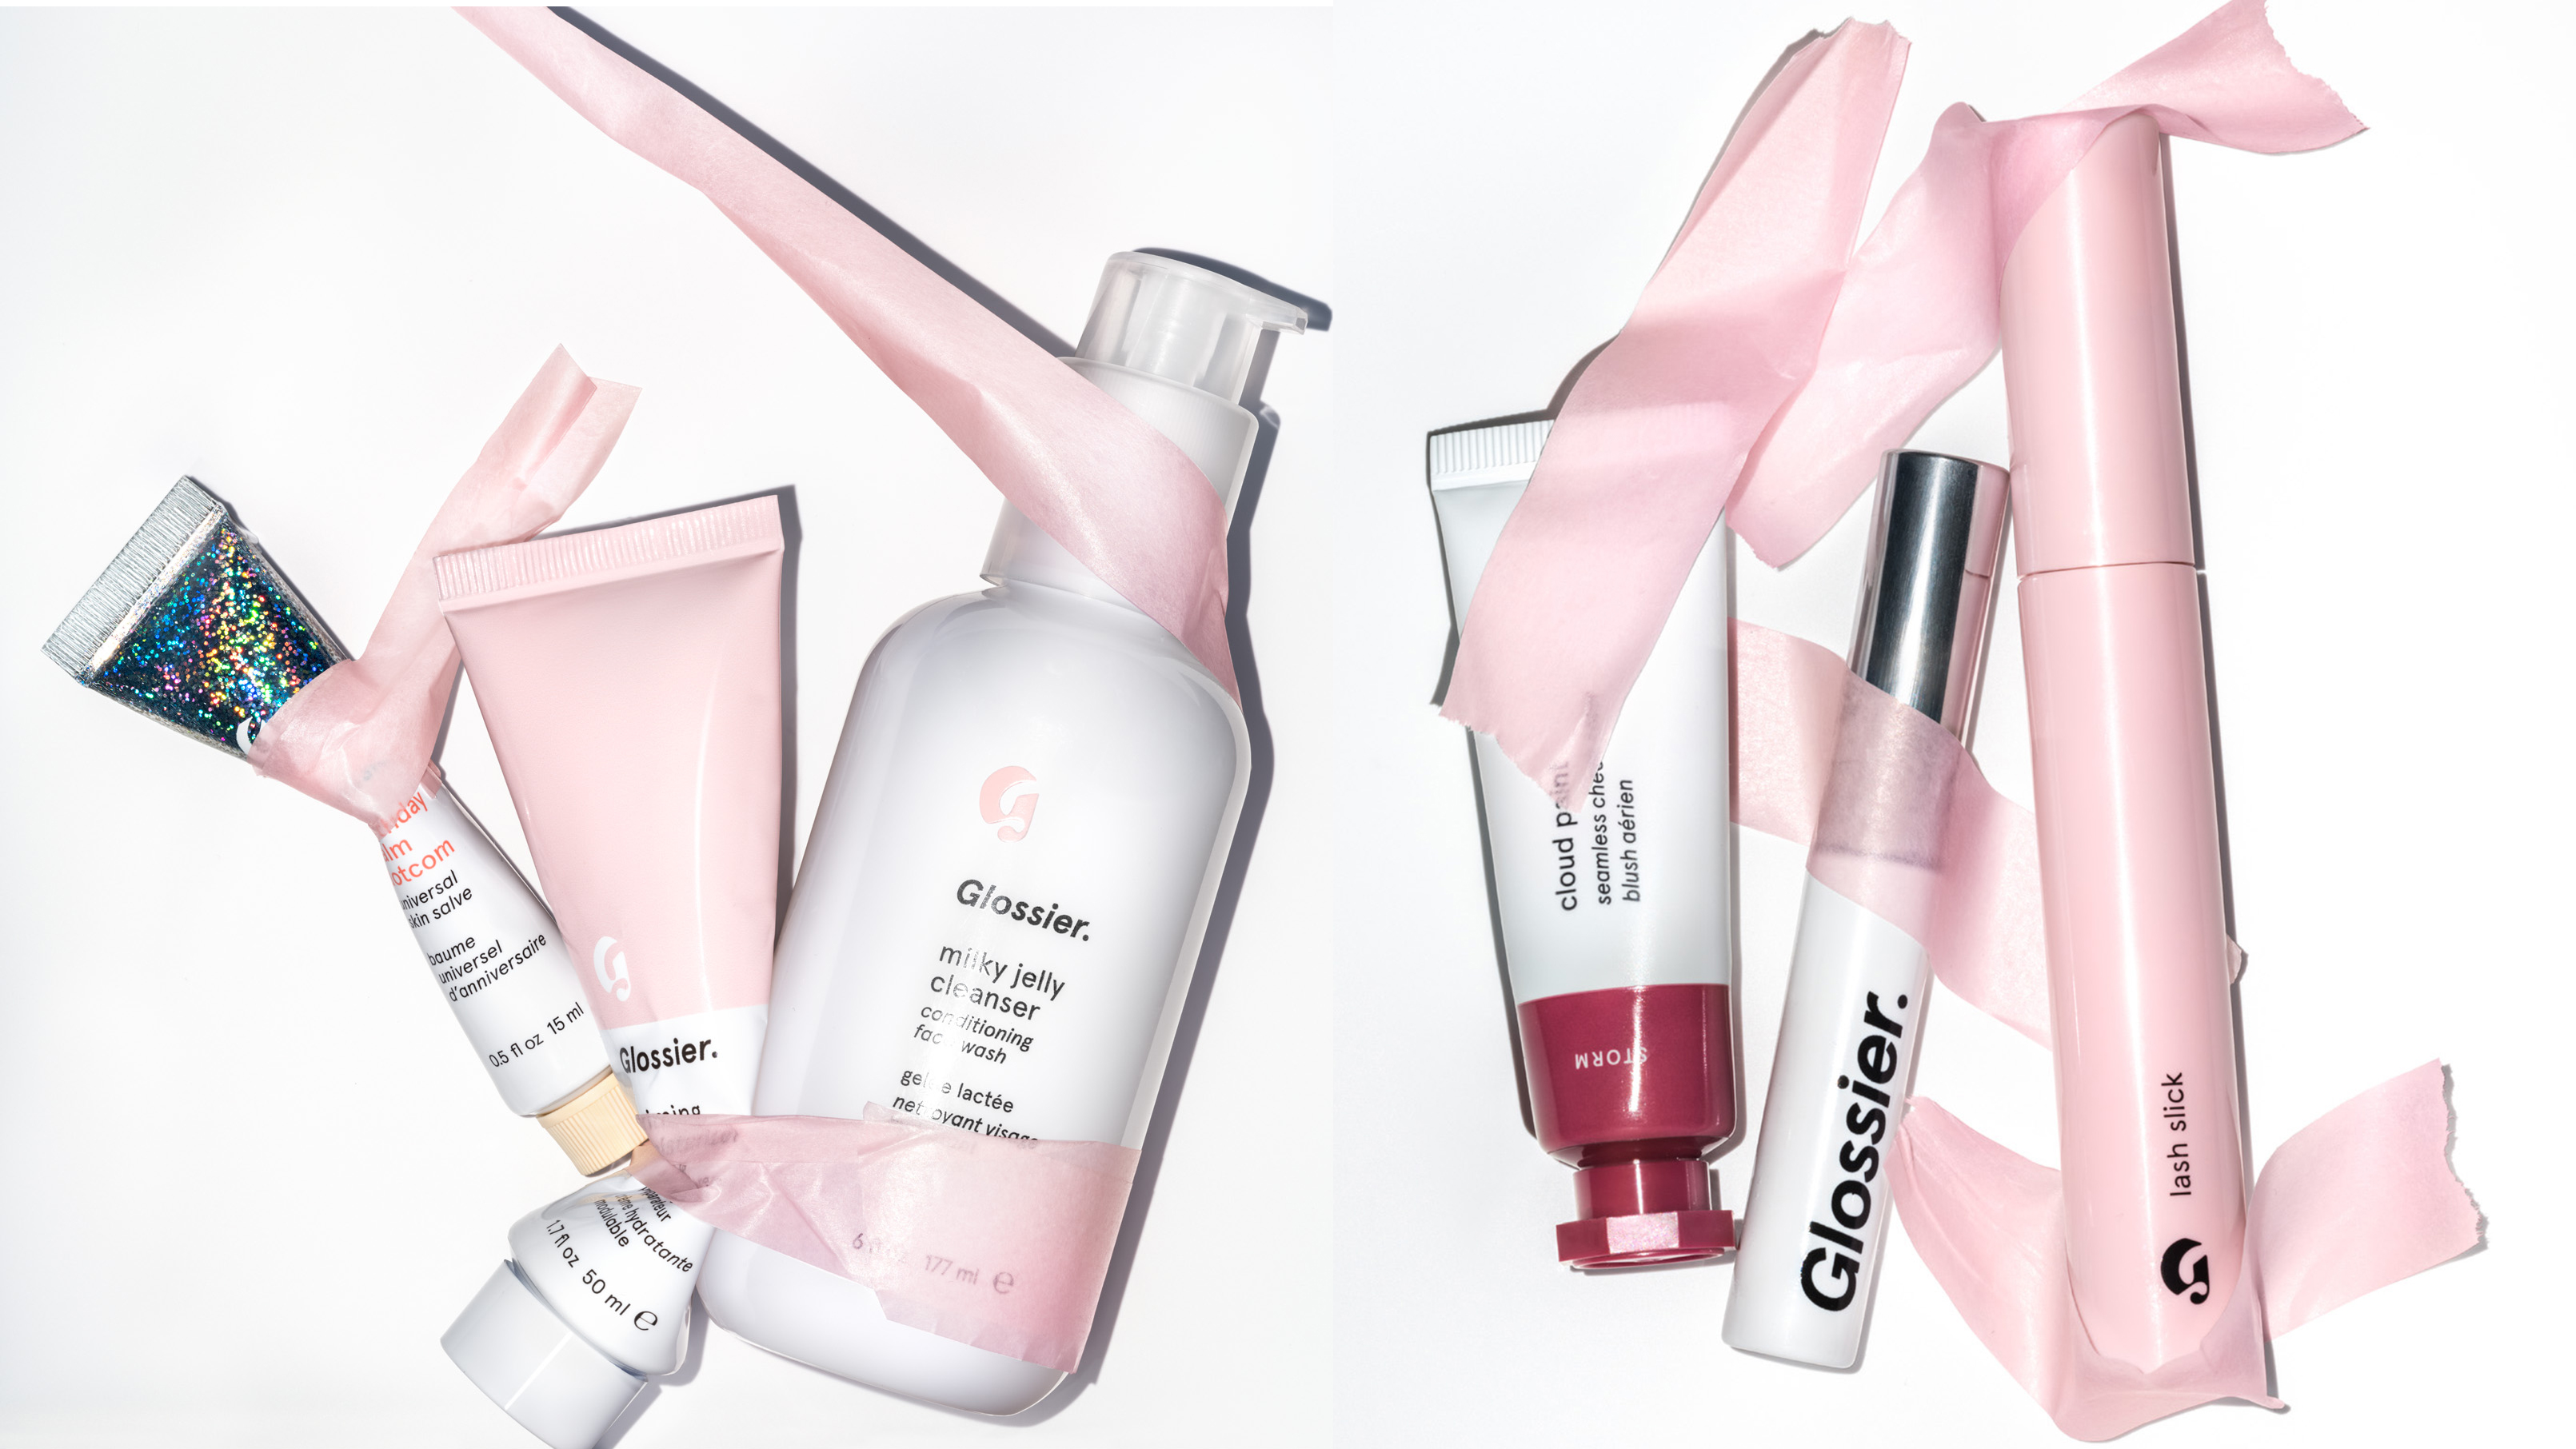 The Glossier Black Friday sale deals you need to know about My